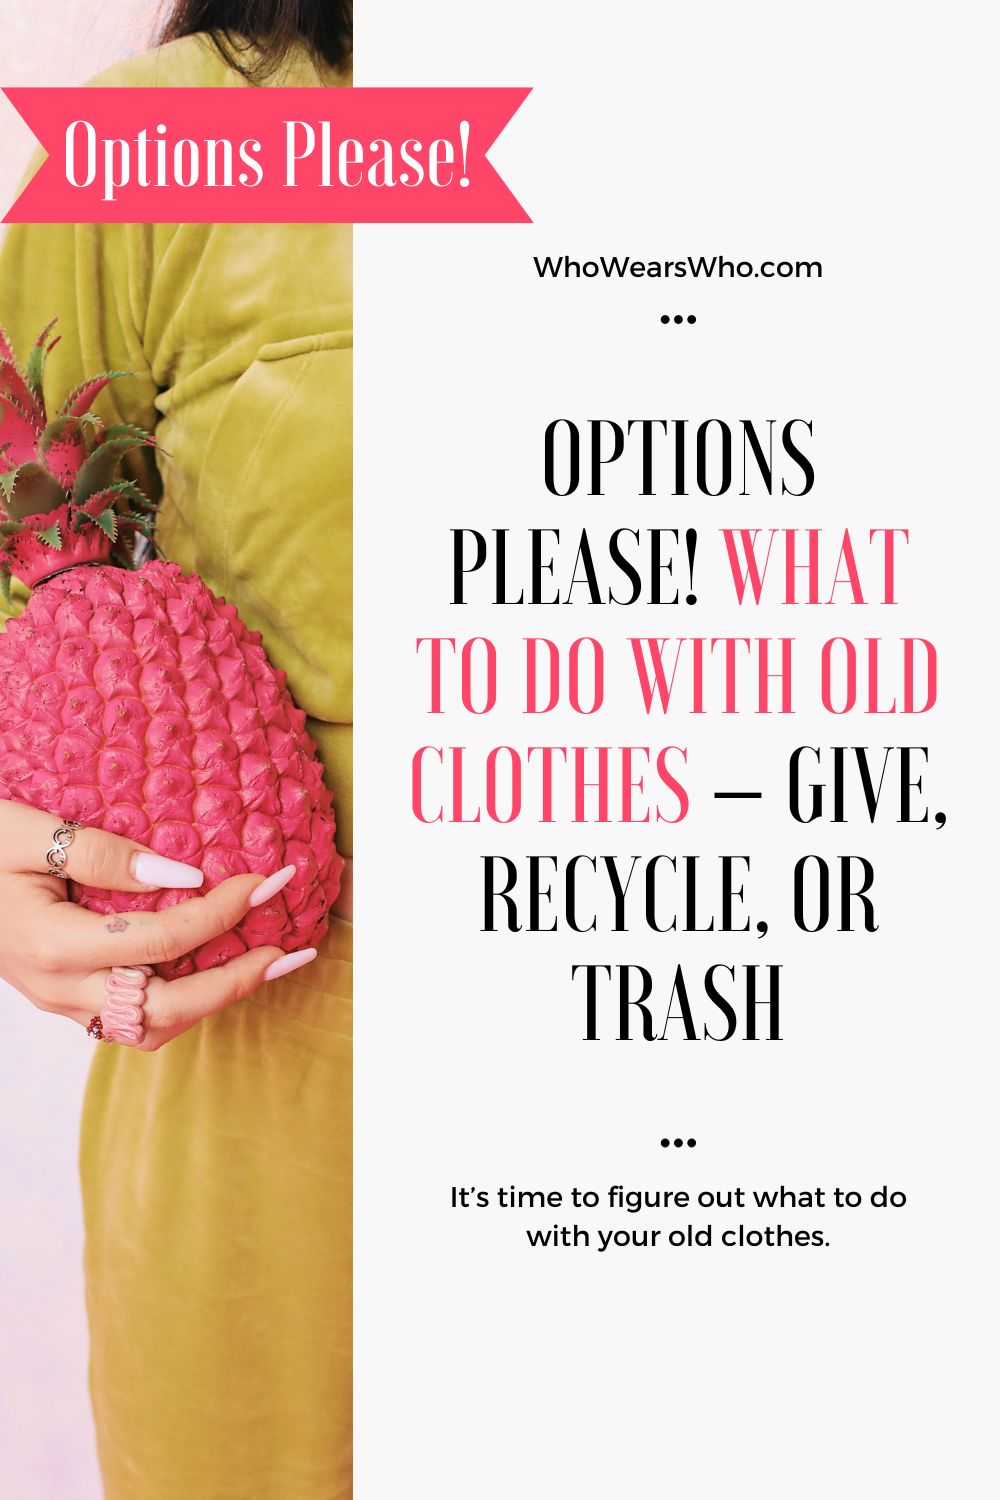 What to do with old clothes